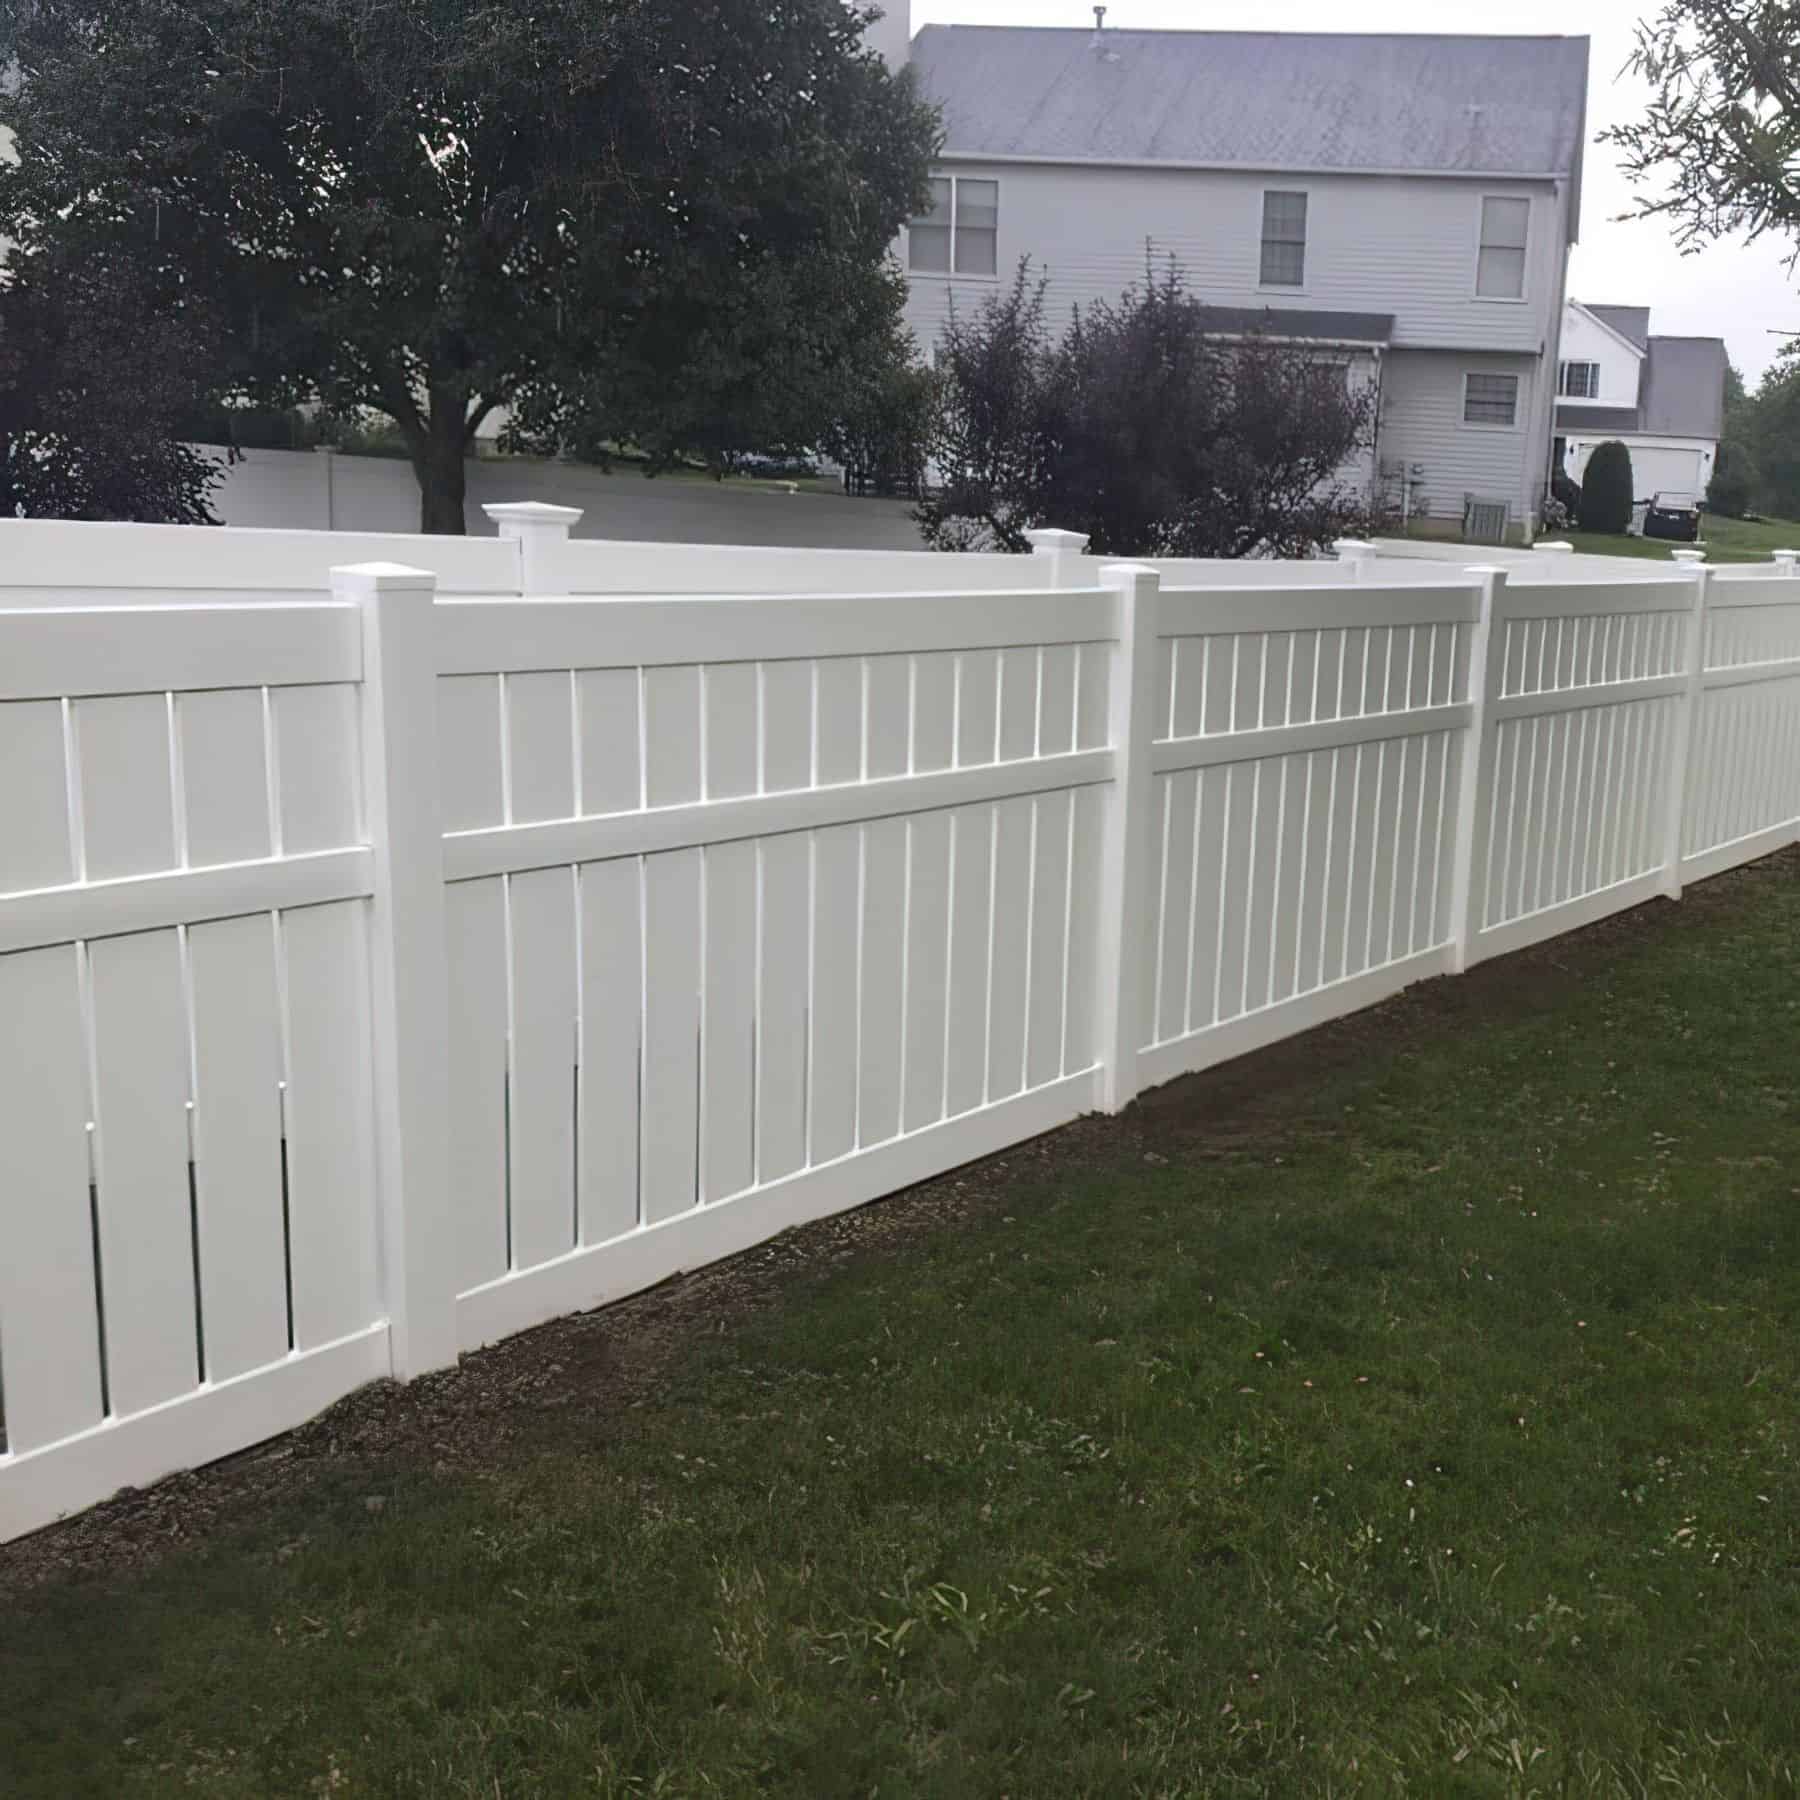 A minimalistic vinyl semi-privacy fence with stylized gaps separating two different backyards while surrounded by trees.